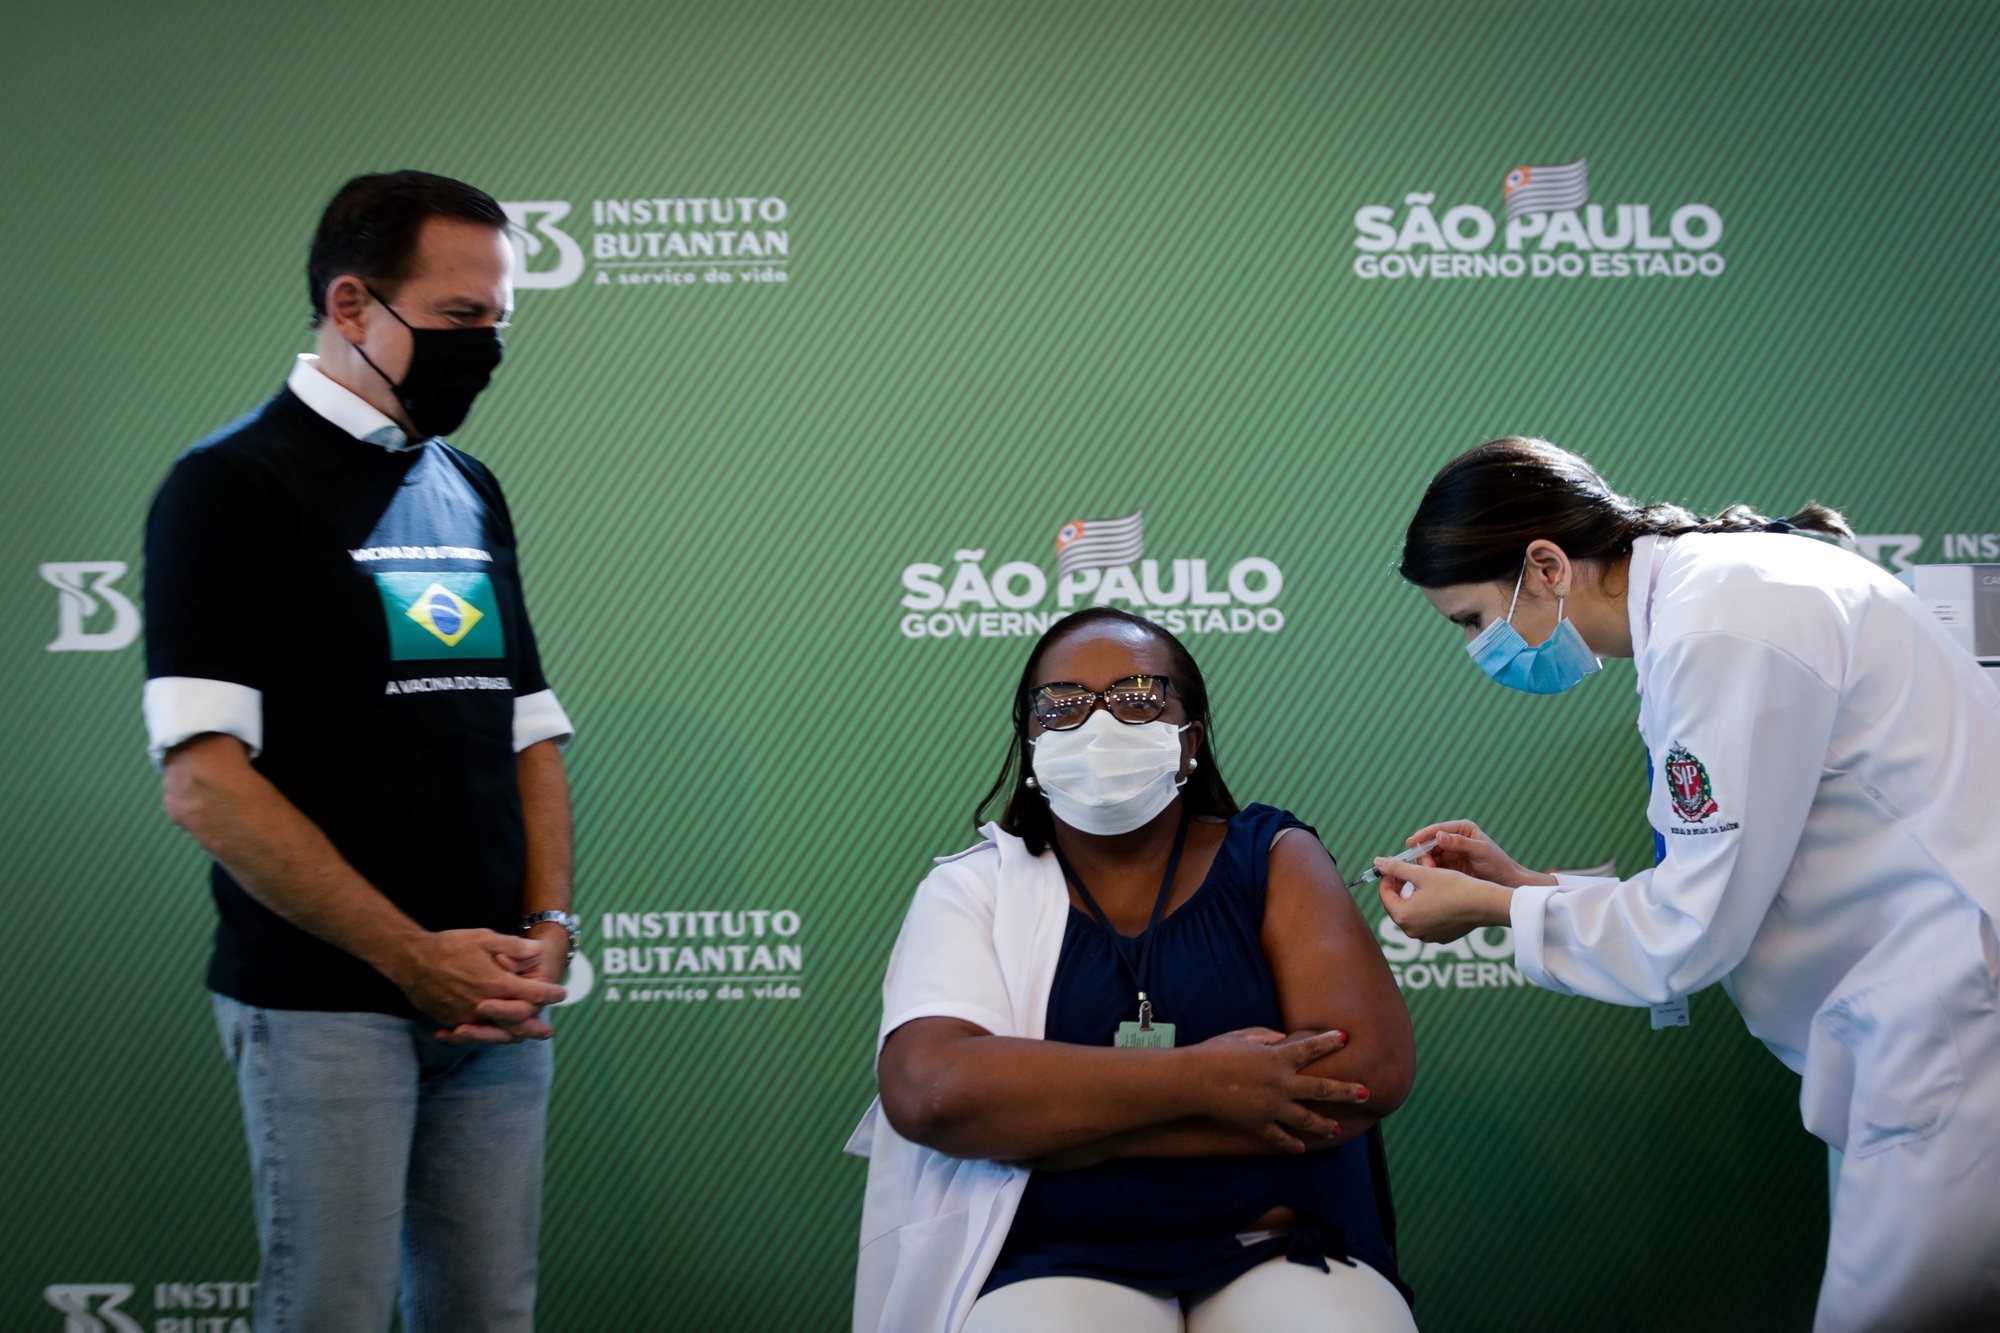 epa08944696 Monica Calazans (C), a nurse at Hospital las Clinicas in the capital of Sao Paulo, receives the vaccine against covid-19 in the presence of the governor of the state of Sao Paulo, Joao Doria (L), in Sao Paulo, Brazil, 17 January 2021. Brazil, one of the countries in the world most affected by the coronavirus pandemic, applied the first dose of the covid-19 vaccine to the 54-year-old nurse this Sunday in Sao Paulo, at a time when the Latin American giant faces a second wave of the disease. The first dose of the vaccine developed by the Chinese laboratory Sinovac and the Brazilian Butantan Institute was administered just minutes after the approval of its emergency use by the National Health Surveillance Agency (Anvisa).  EPA/Fernando Bizerra Jr